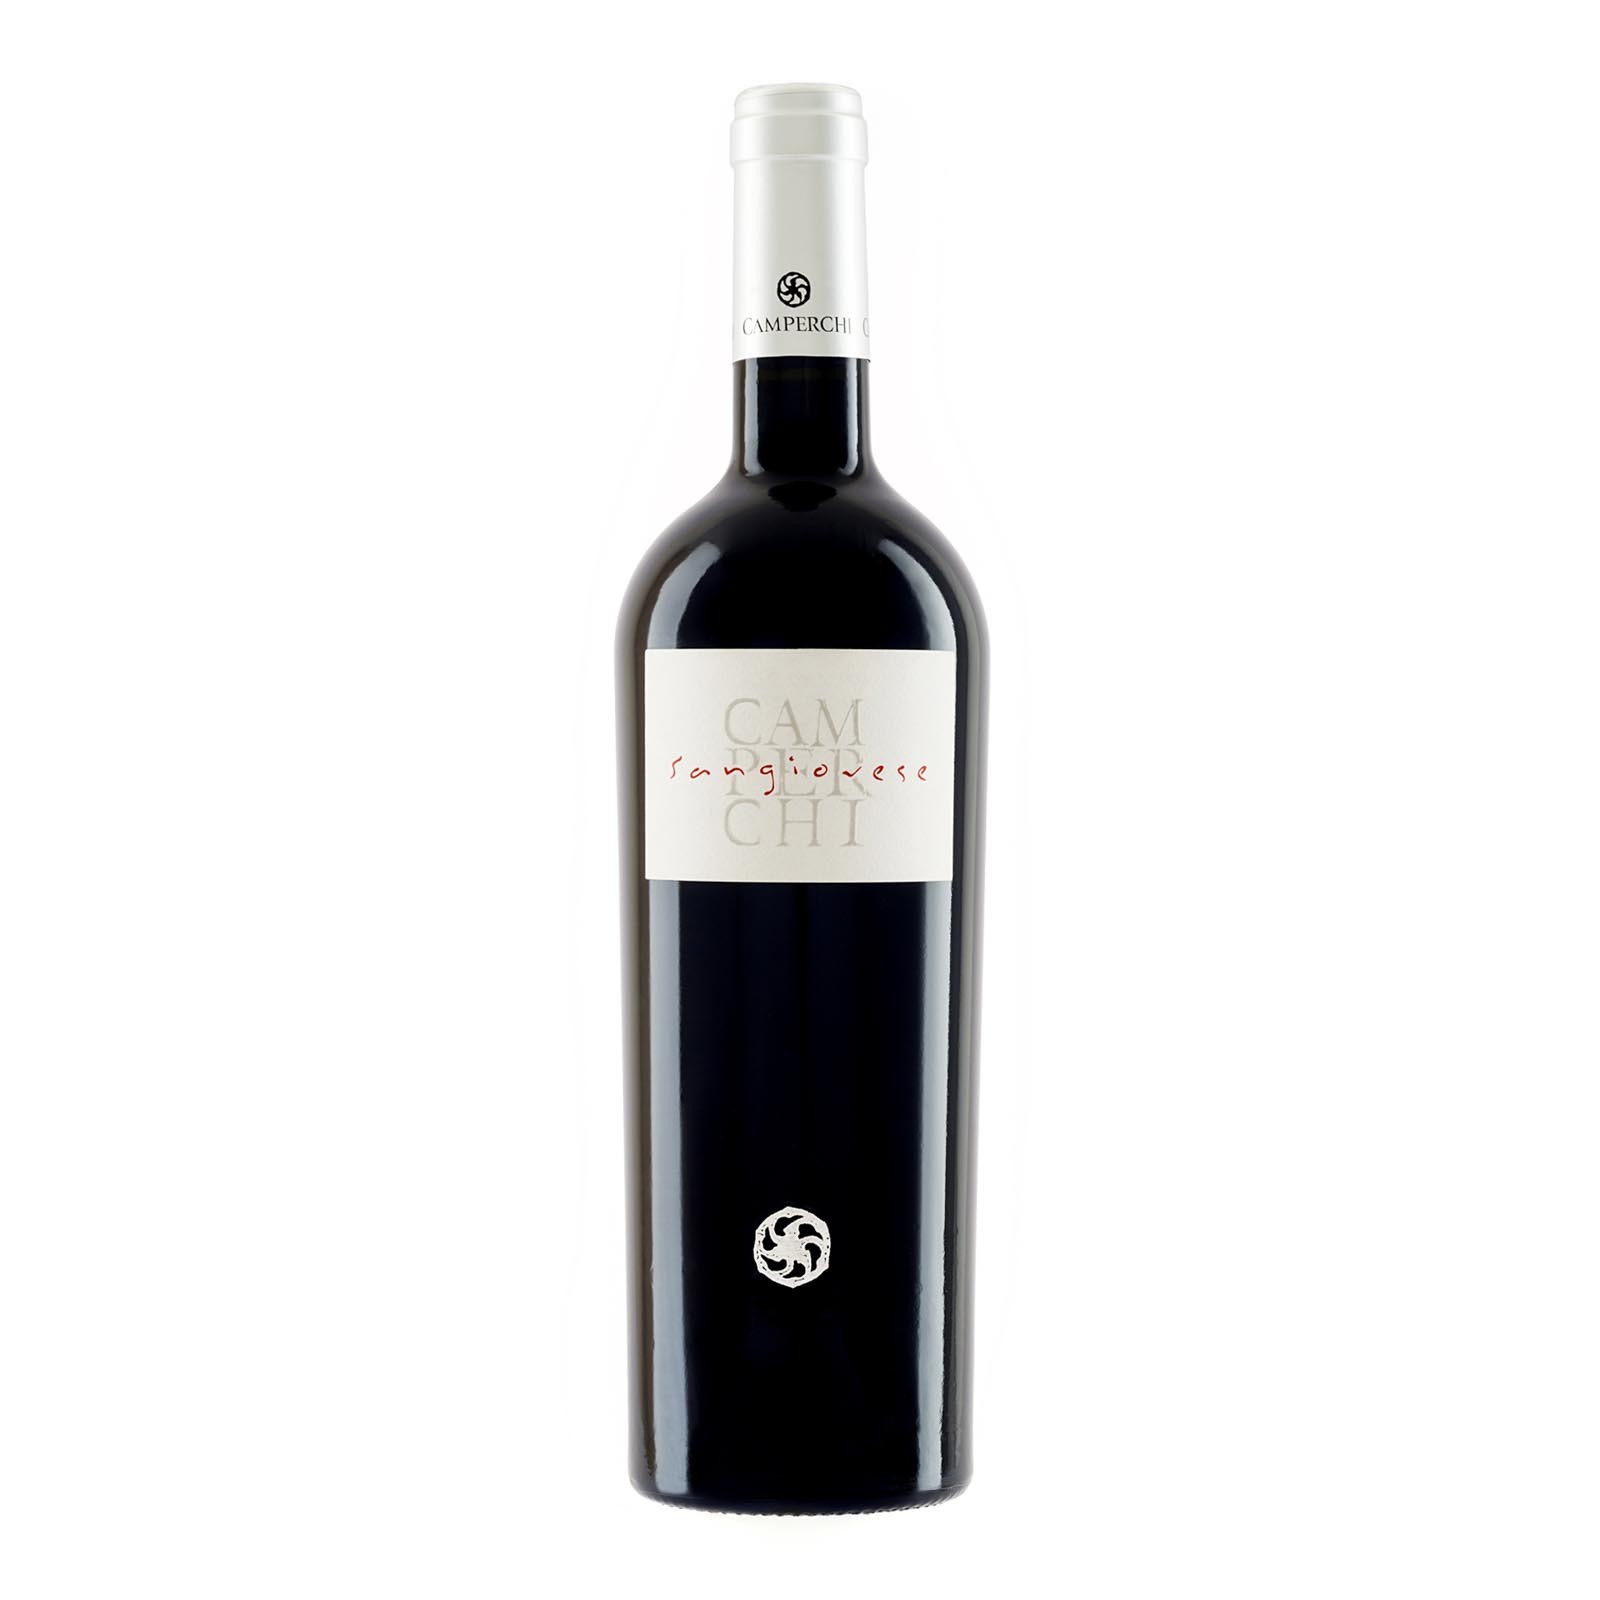 “Sangiovese” of the Grand Collection line of Camperchi is born in vineyards located on rocky hills in the heart of Tuscany. Powerful and complex, it is the pride and the essence of the real Tuscany.